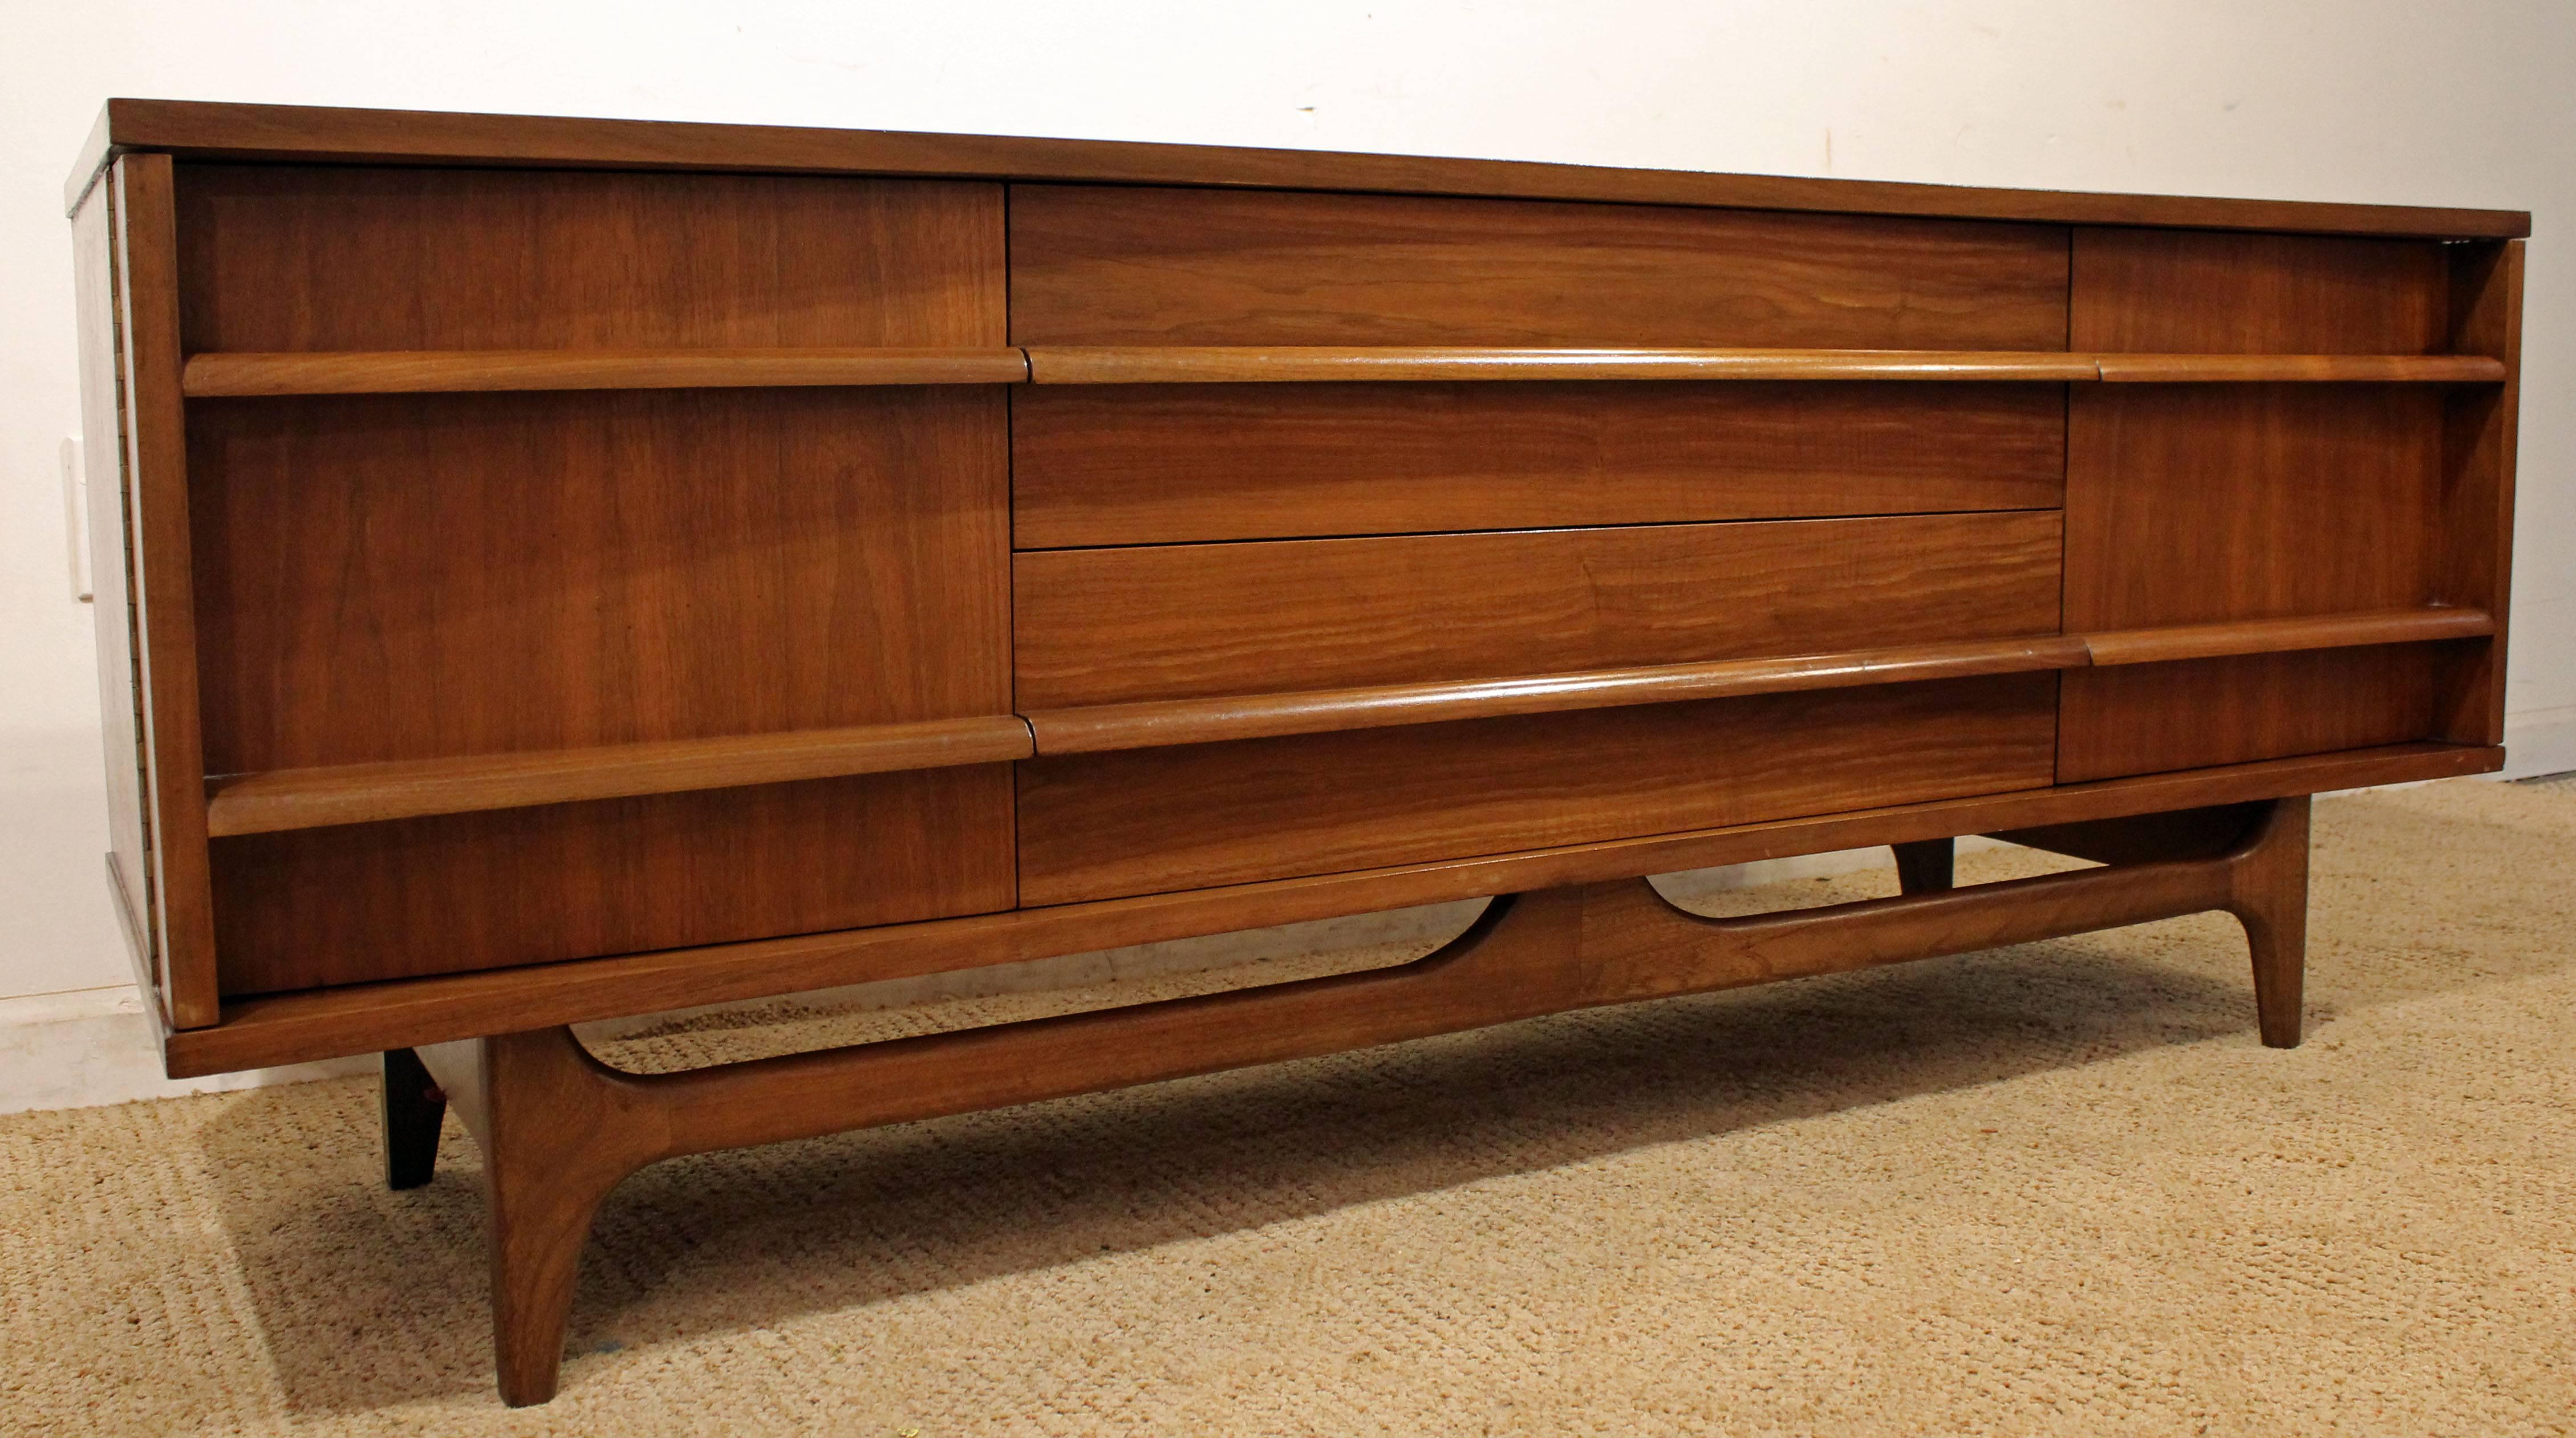 This piece is made of walnut, featuring a curved front, two doors on either side and three center drawers with sculpted pulls. It has been refinished.

Dimensions: 
64